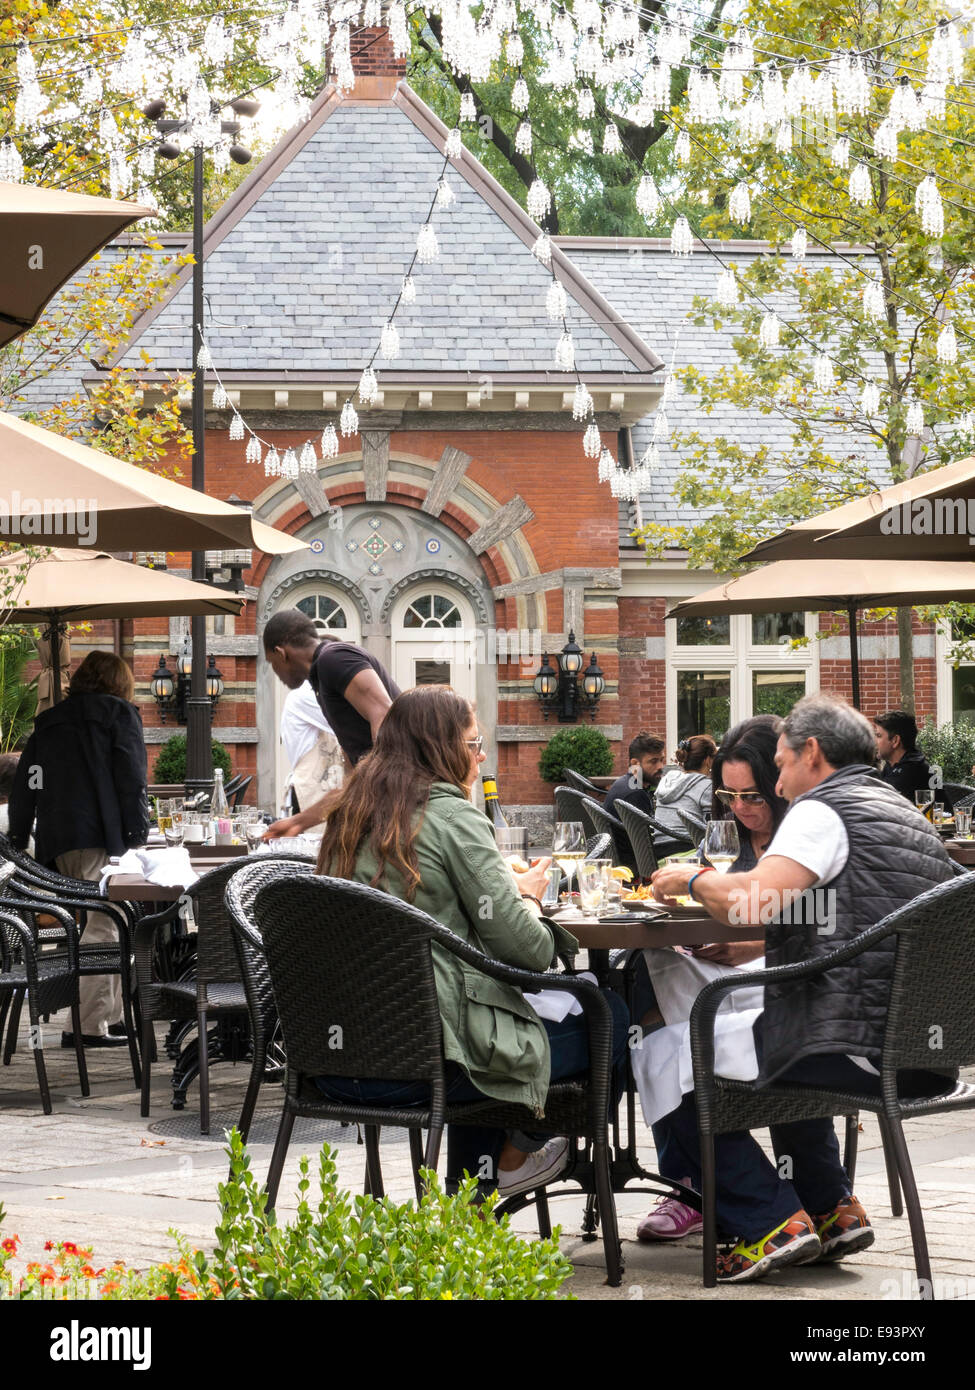 Diners Enjoying Patio, Tavern on the Green Restaurant in Central Park, NYC Stock Photo